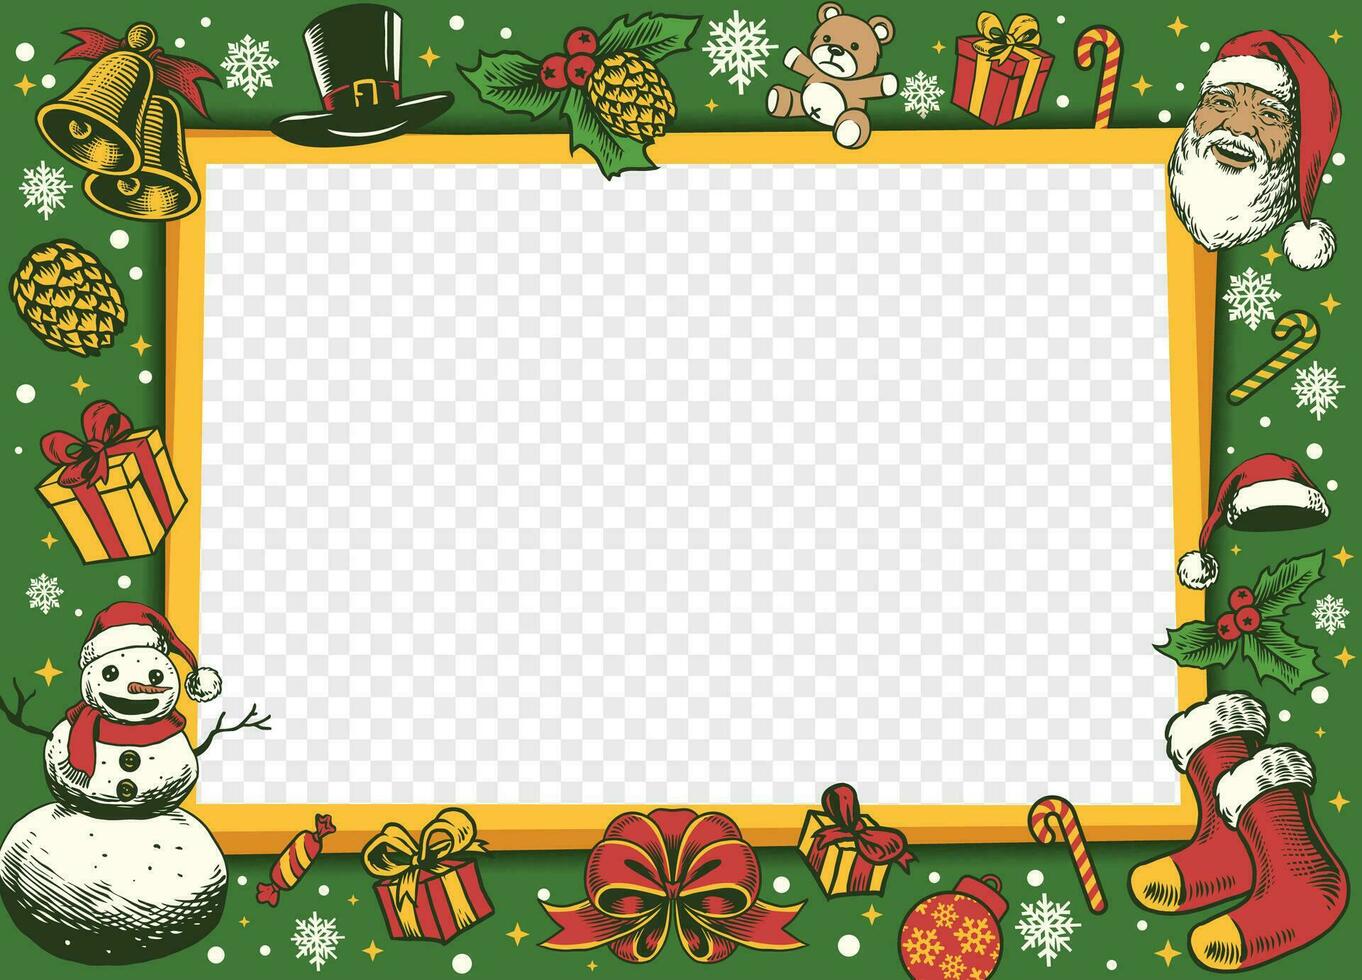 Christmas Border Frame With Christmas Object Transparent vector